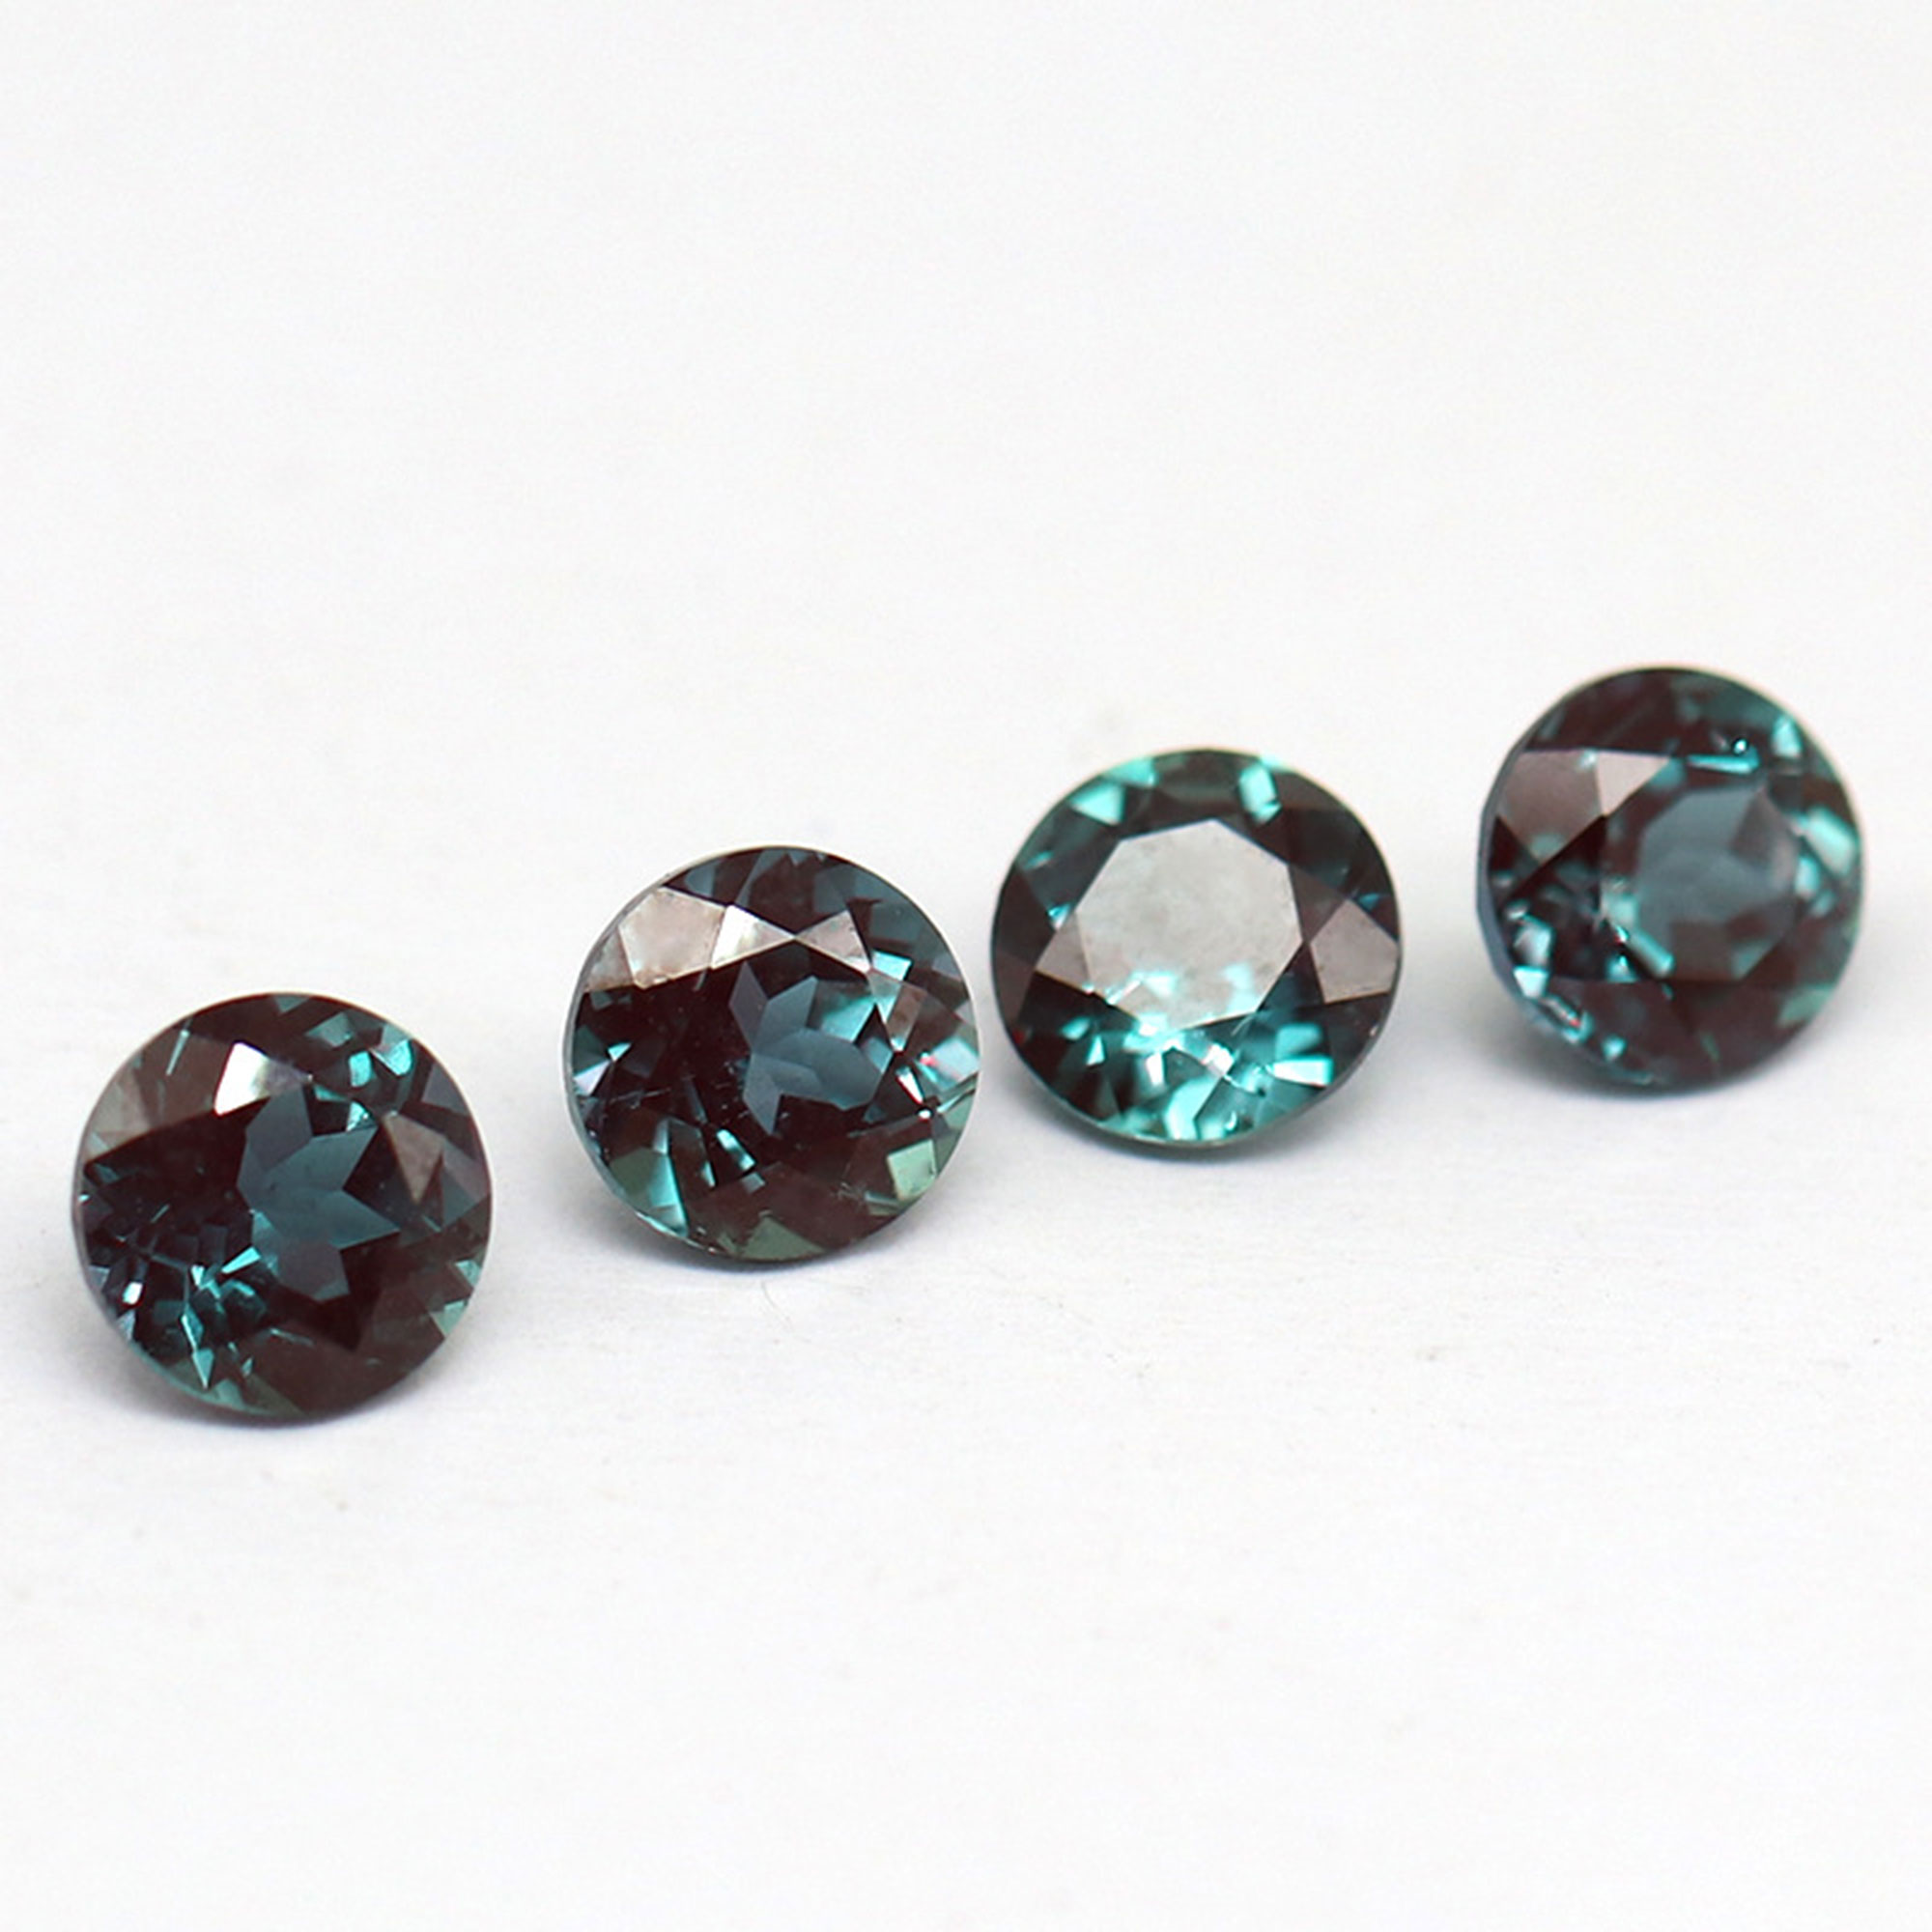 Lab Grown Alexandrite Faceted Gemstone,Round Color Change Stone,June Birthstone,DIY Loose Gemstone Supplies 4110200 - Click Image to Close